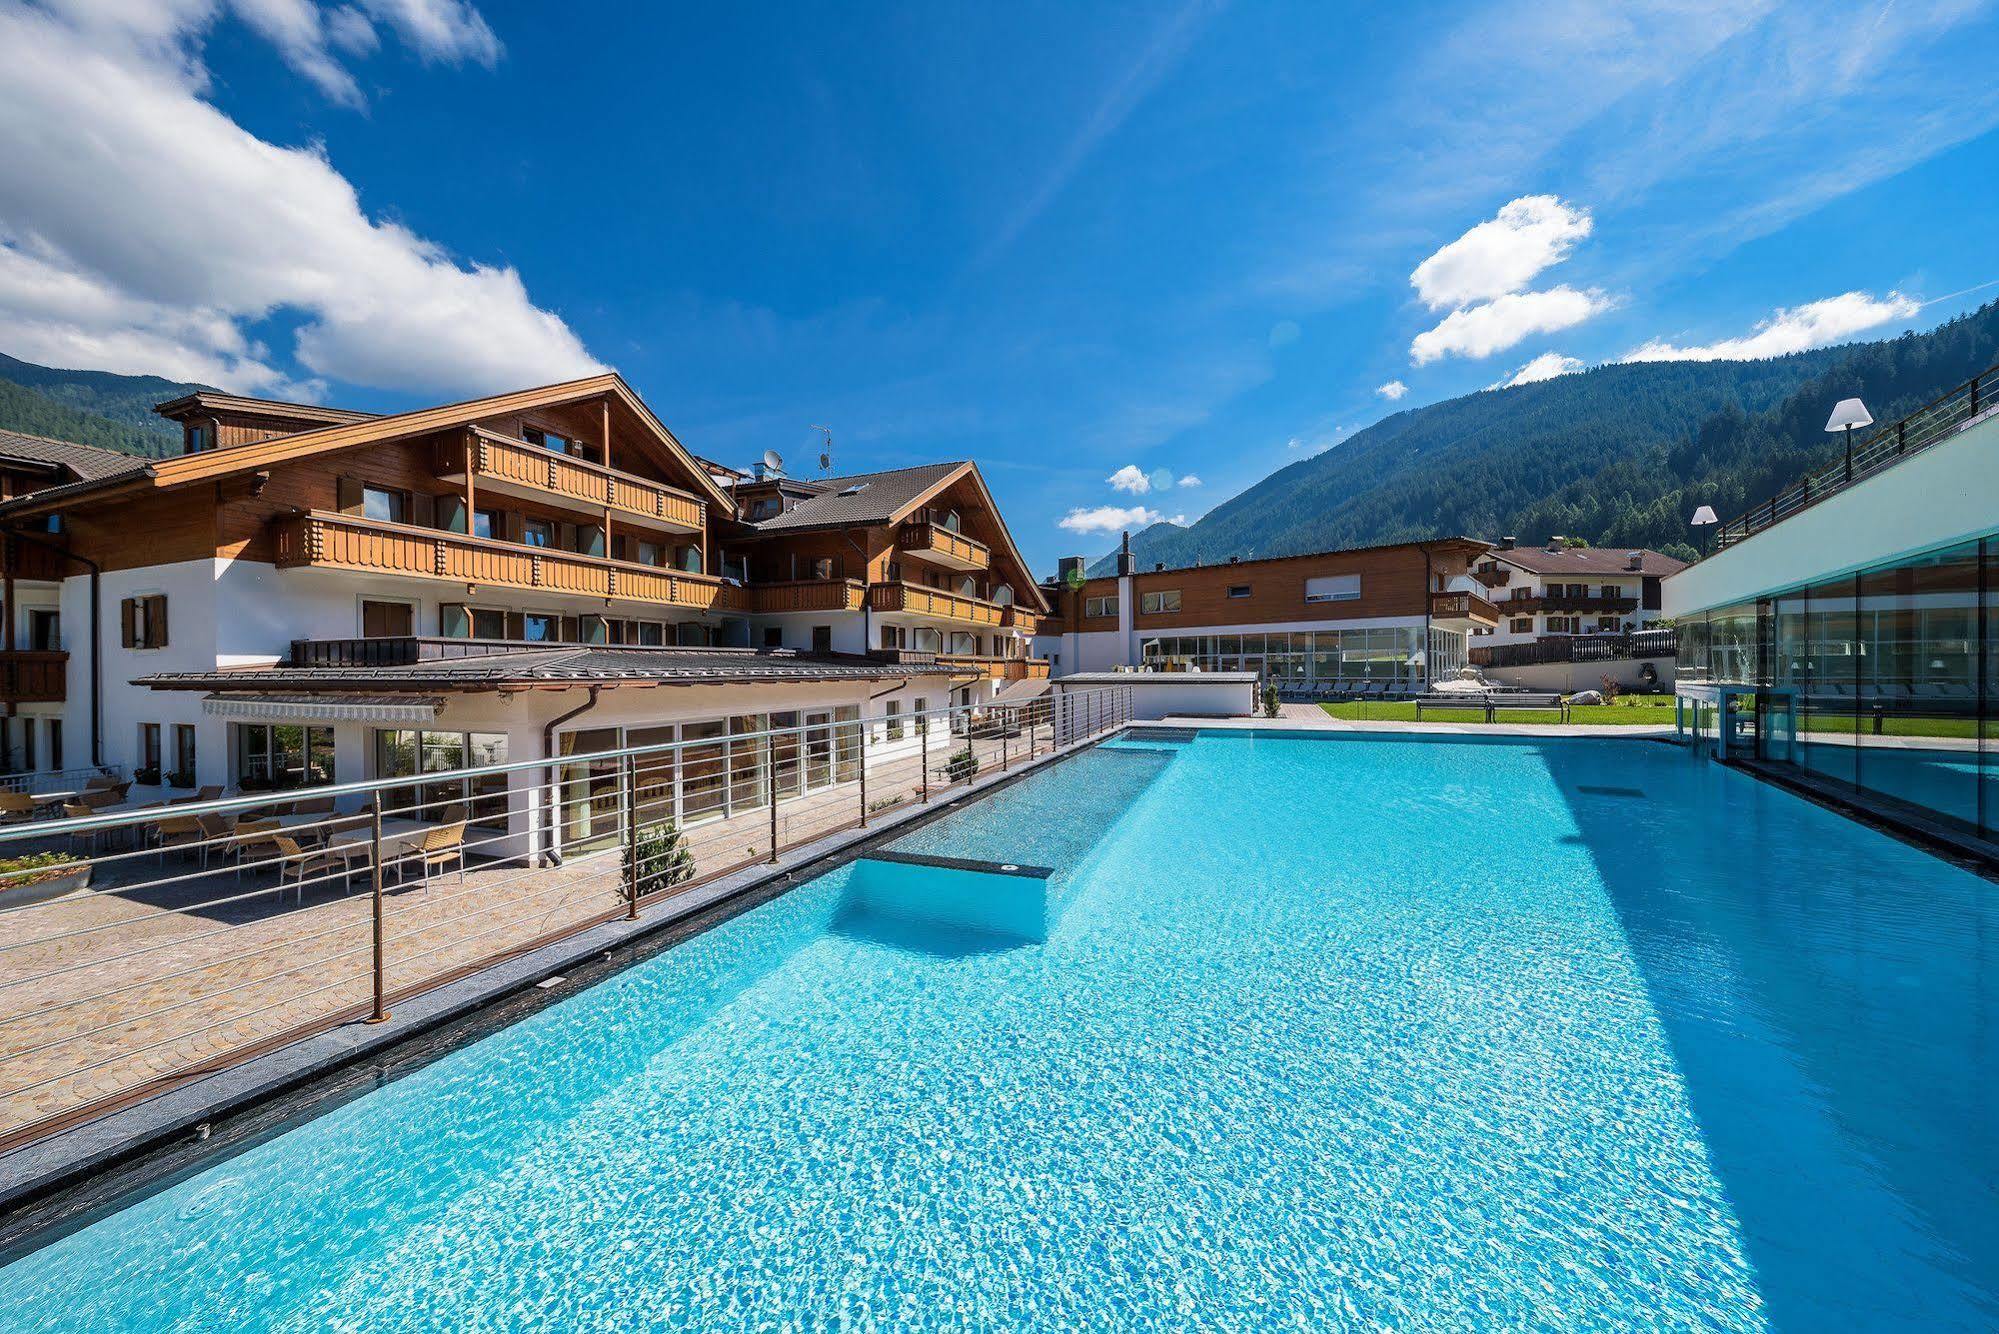 ALPINE NATURE HOTEL STOLL VALLE DI CASIES (Italy) - from US$ 350 | BOOKED